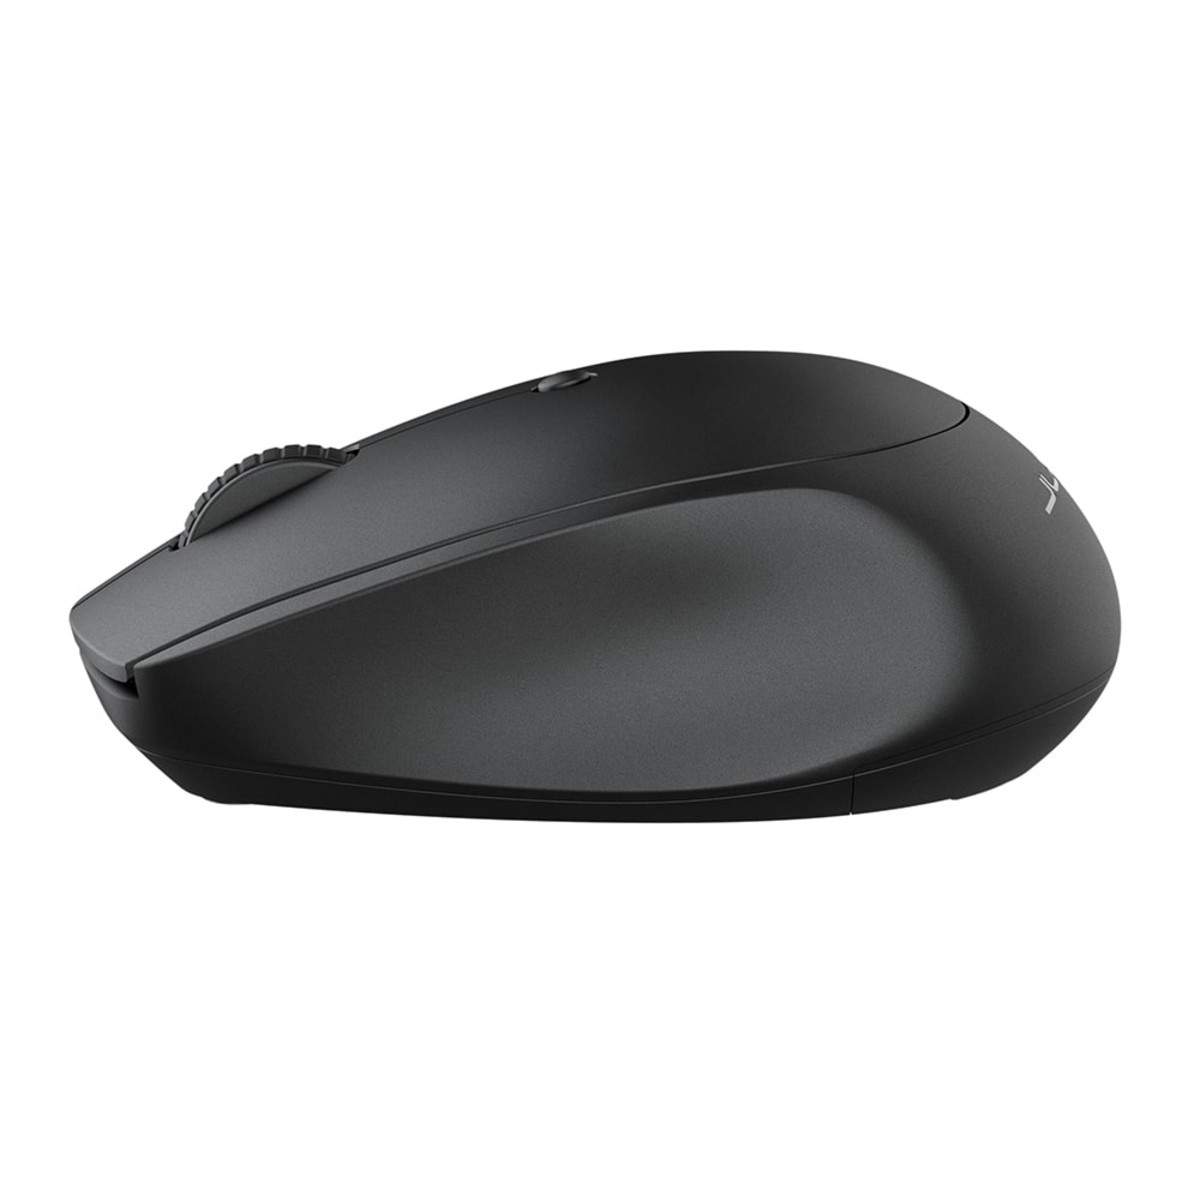 GO Charge Mouse - Black